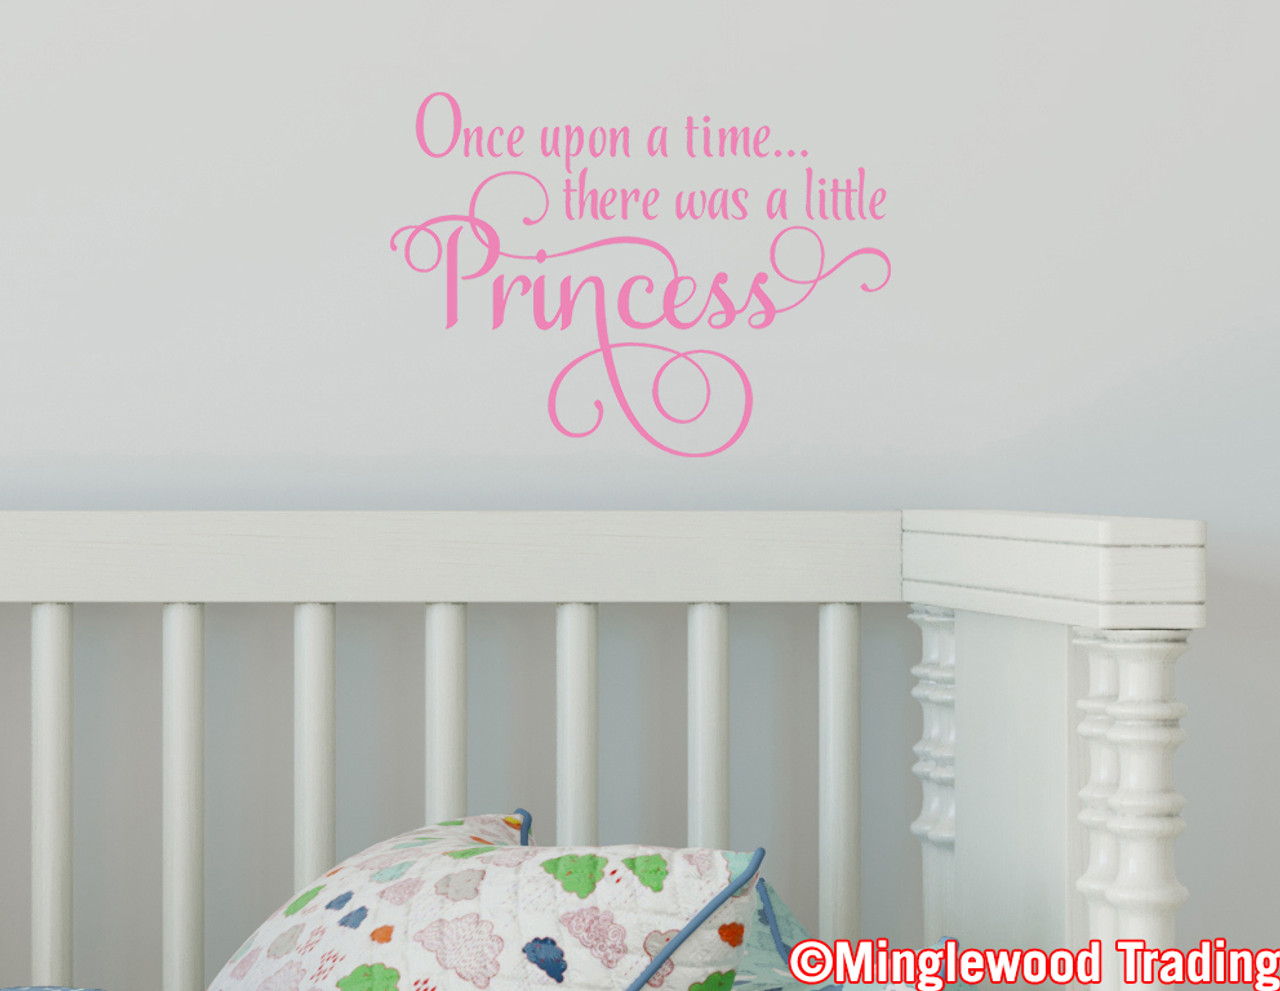 Once Upon a Time There Was a Little Princess 13" x 9.5" Vinyl Decal Sticker